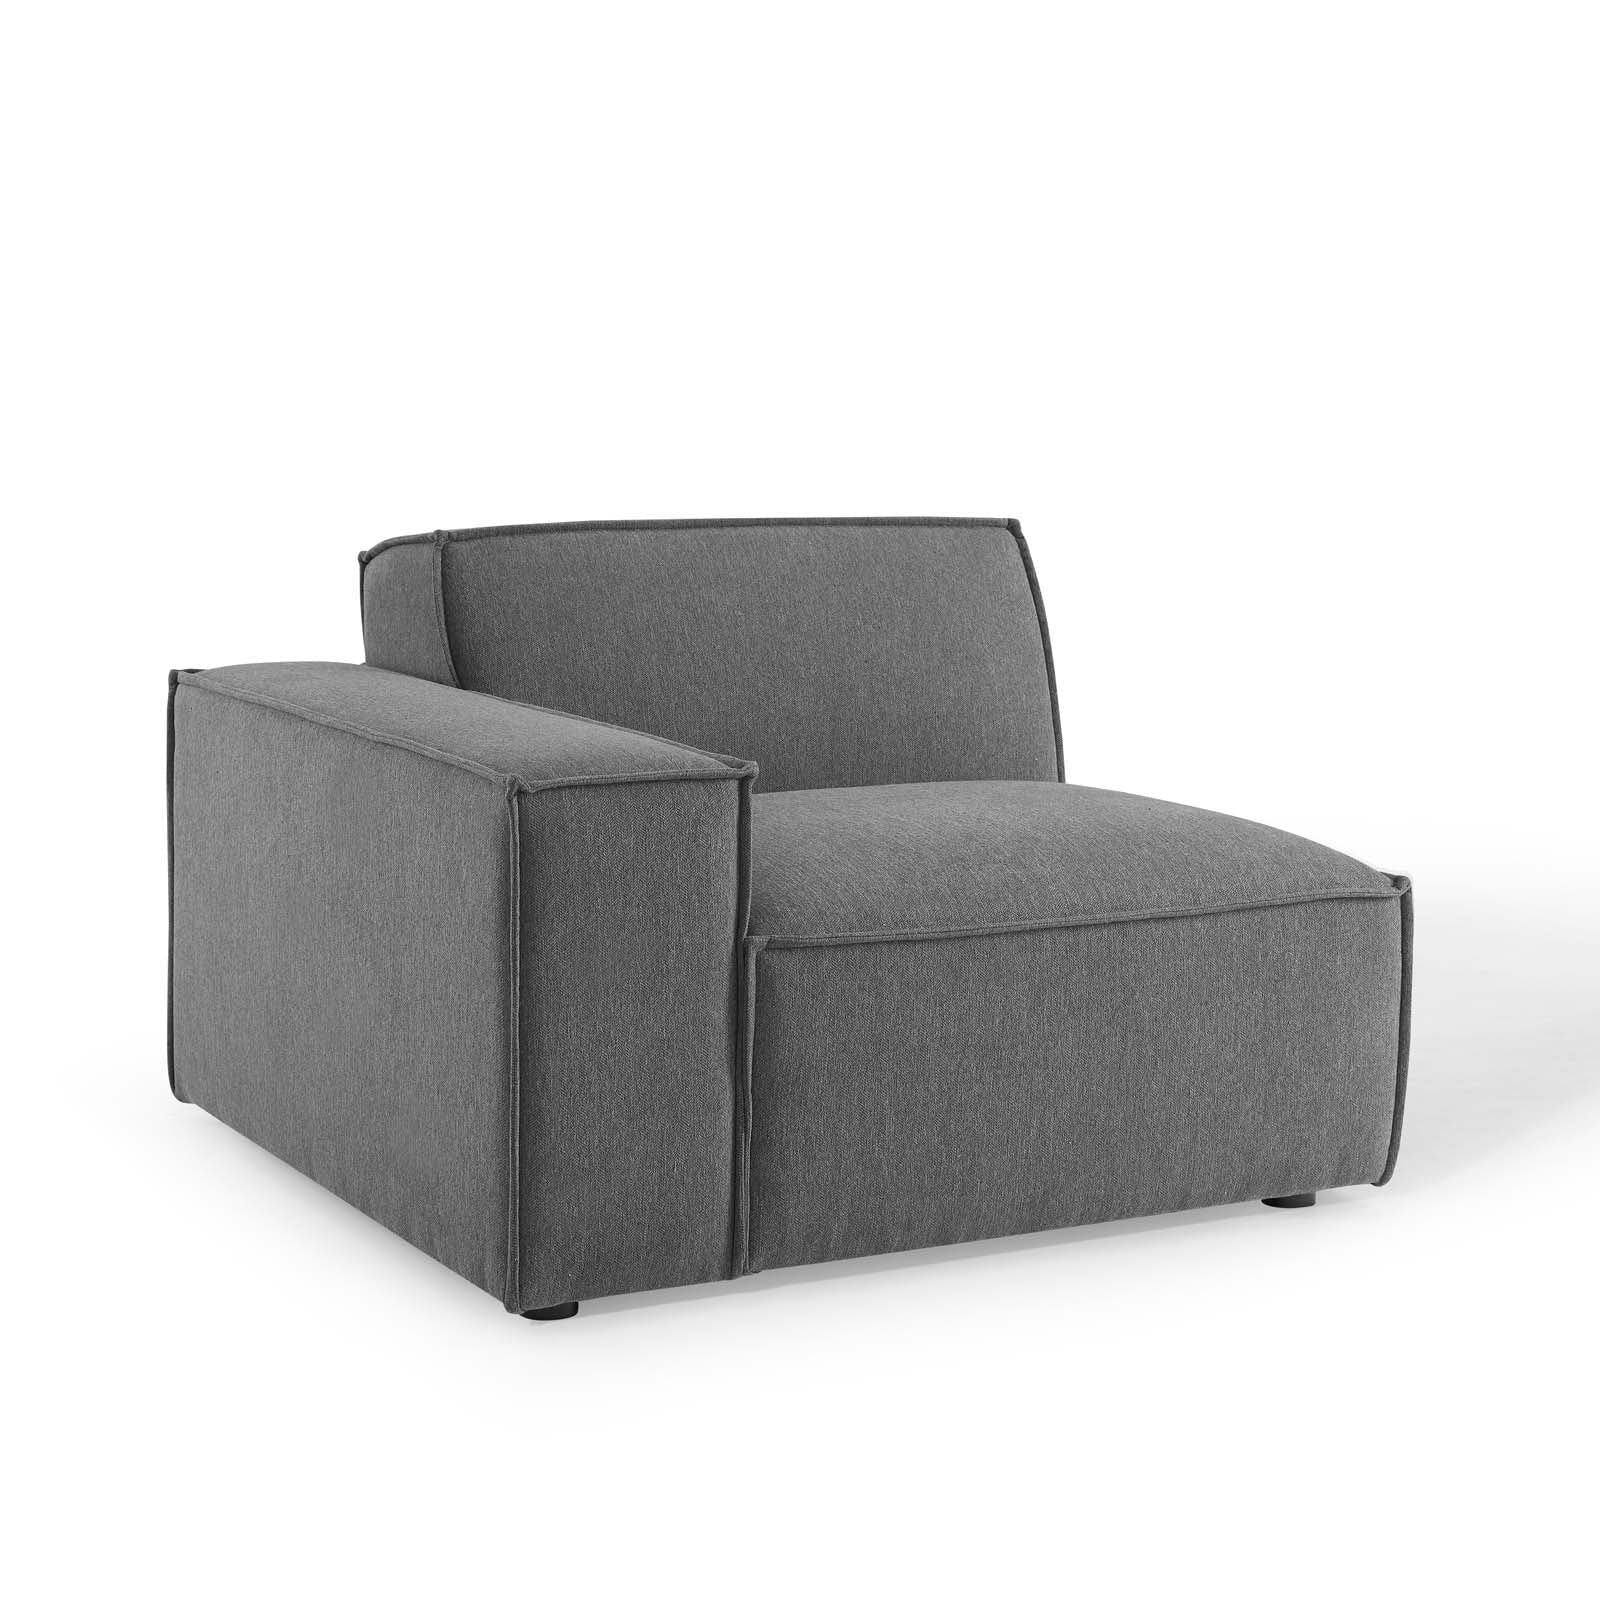 Breeze 4 Piece Sectional - Charcoal